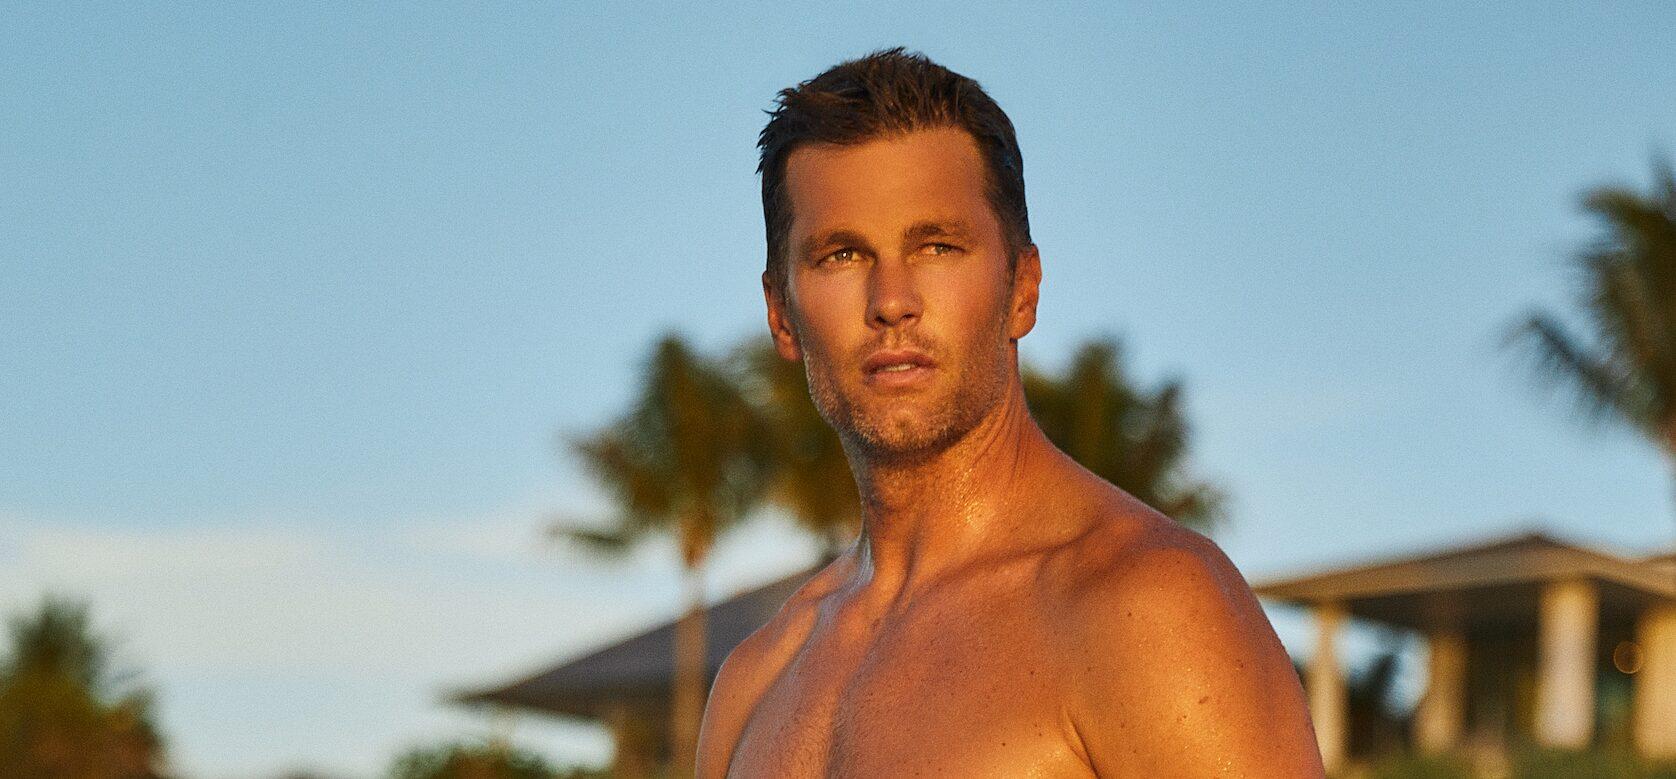 Tom Brady shows off his abs as he poses in new swimwear line